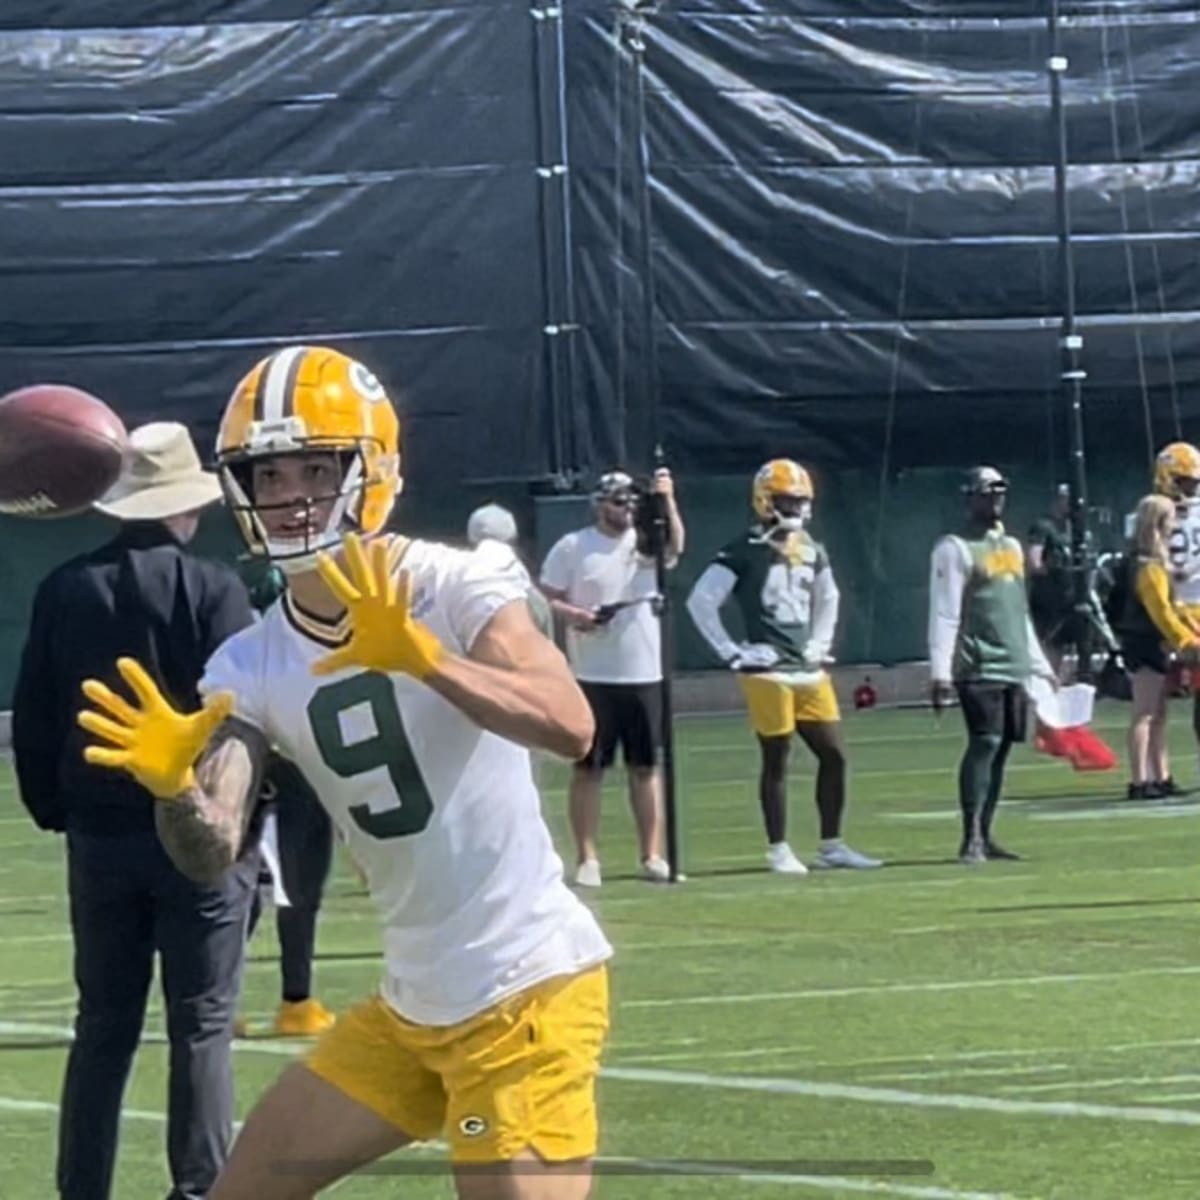 Highlights From Green Bay Packers Training Camp on Aug. 15